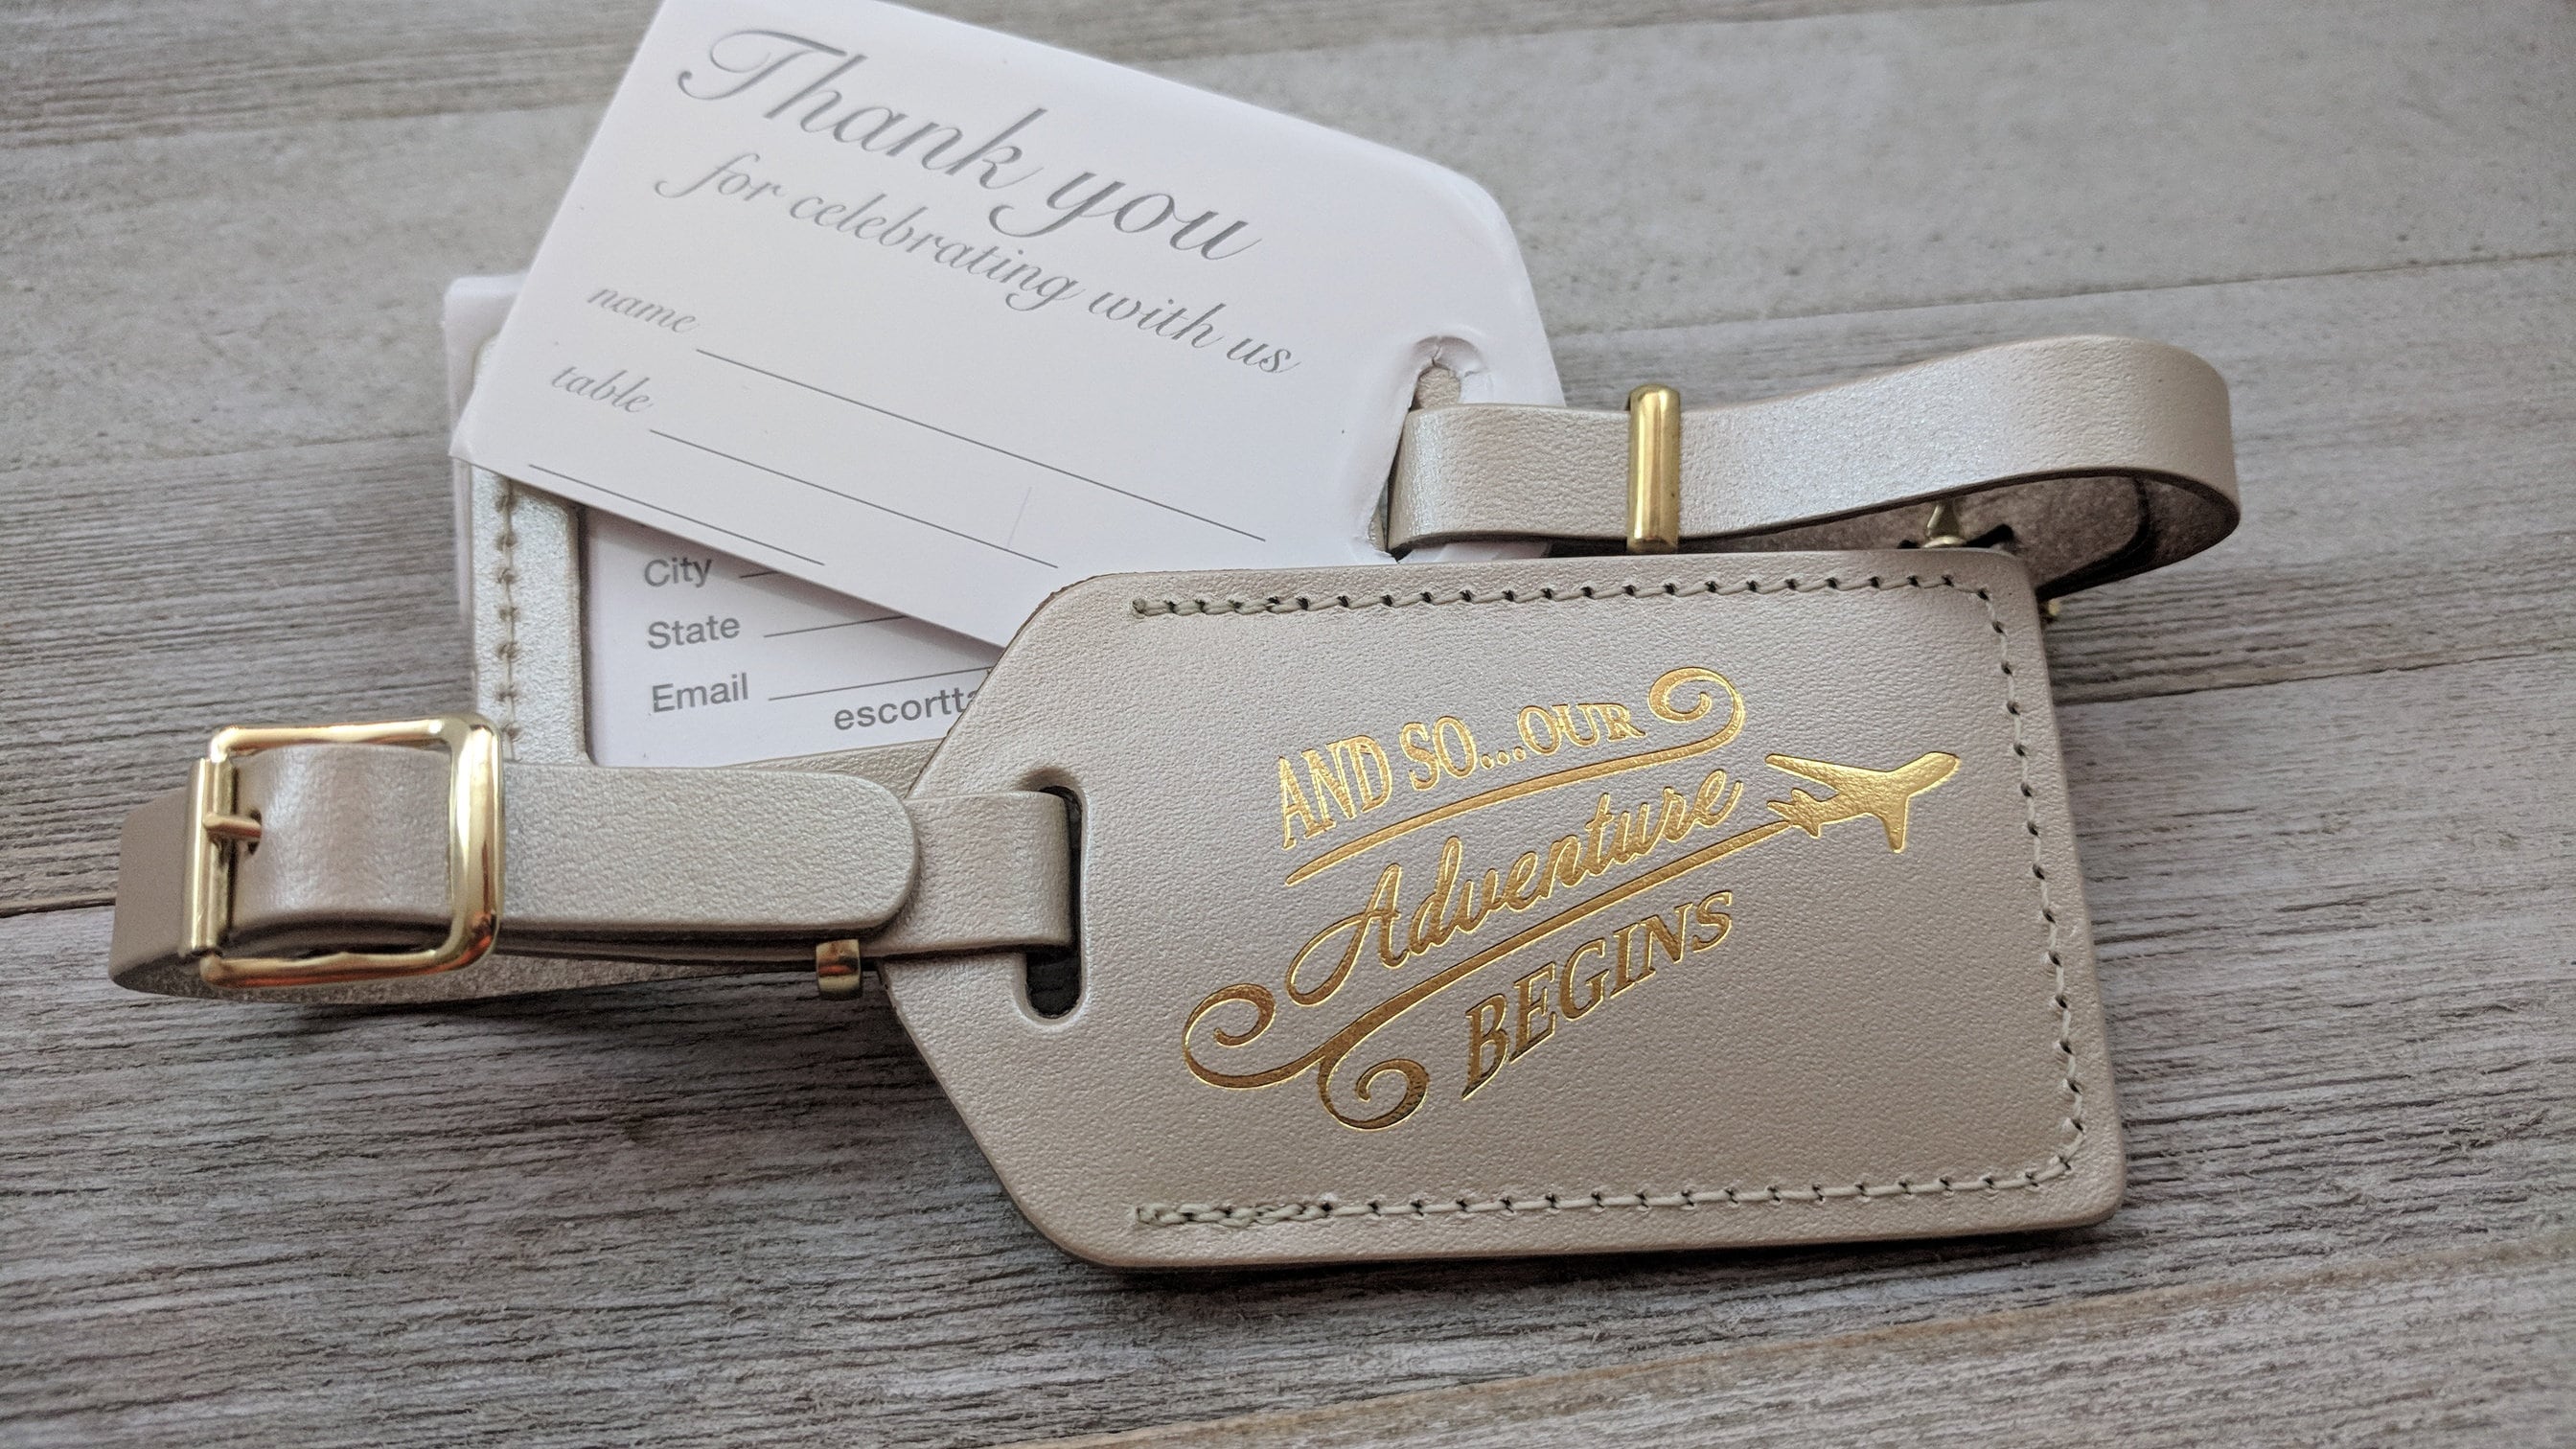 in gold imprint & buckles Gold leather for weddings bridal or baby showers and so the Adventure Begins Bags & Purses Luggage & Travel Luggage Tags Luggage Tag Wedding Favor 